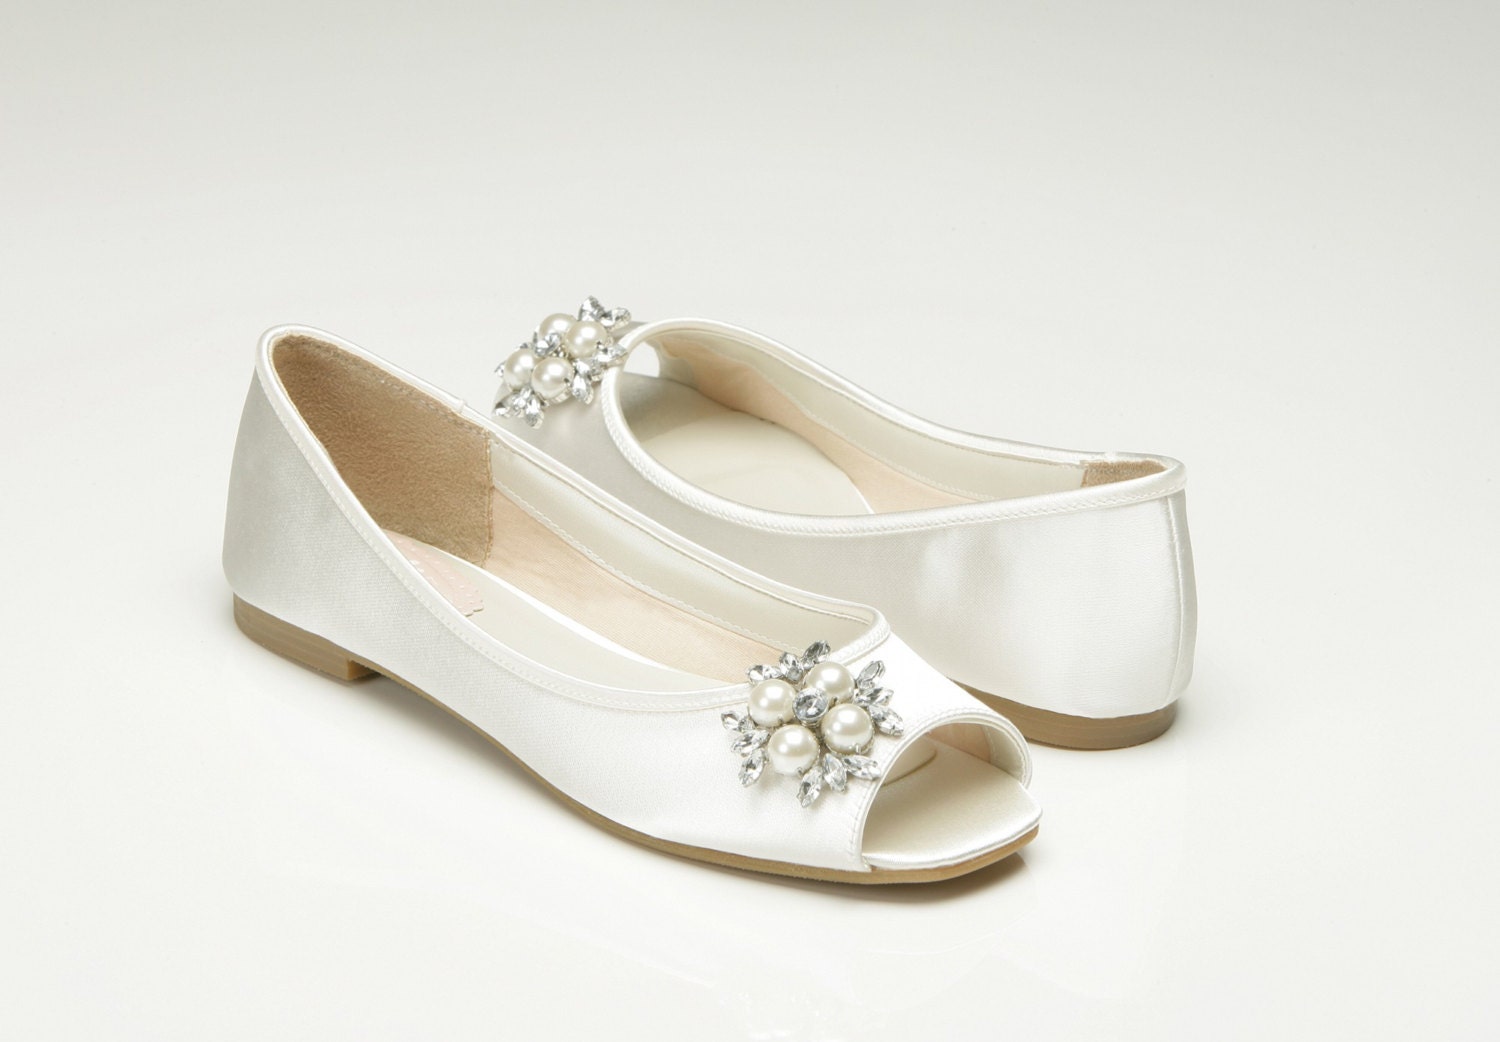 This lovely shoe offered by Pink2Blue is a beautiful peep toe flat bridal shoe. If you are looking for both style and comfort